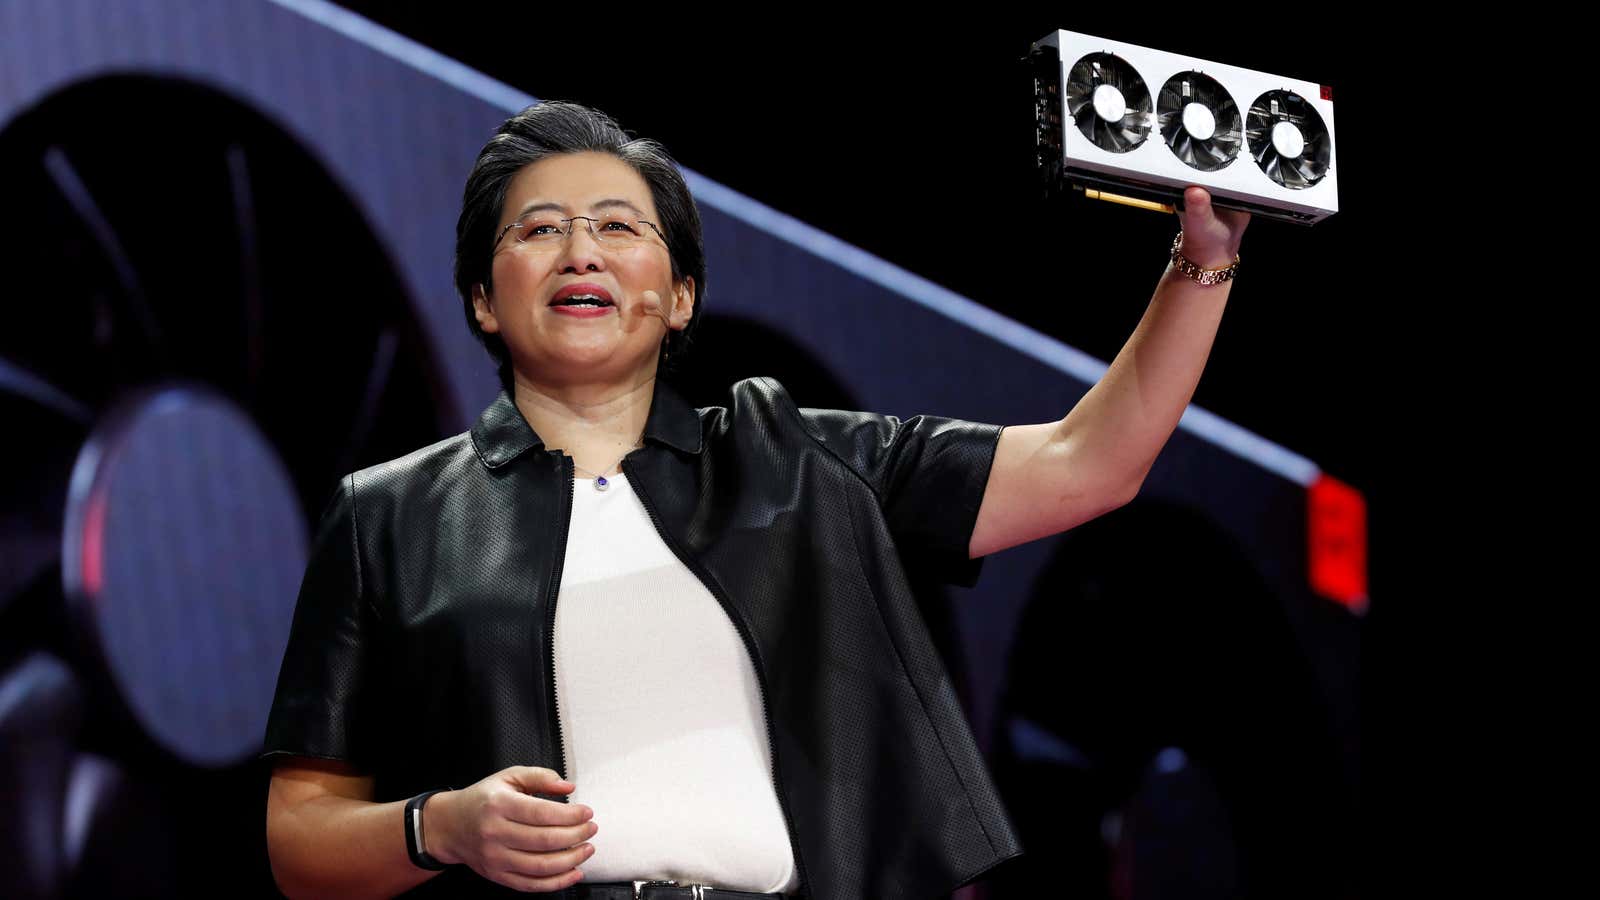 AMD CEO Lisa Su holds up a graphics card—gamers’ holy grail.